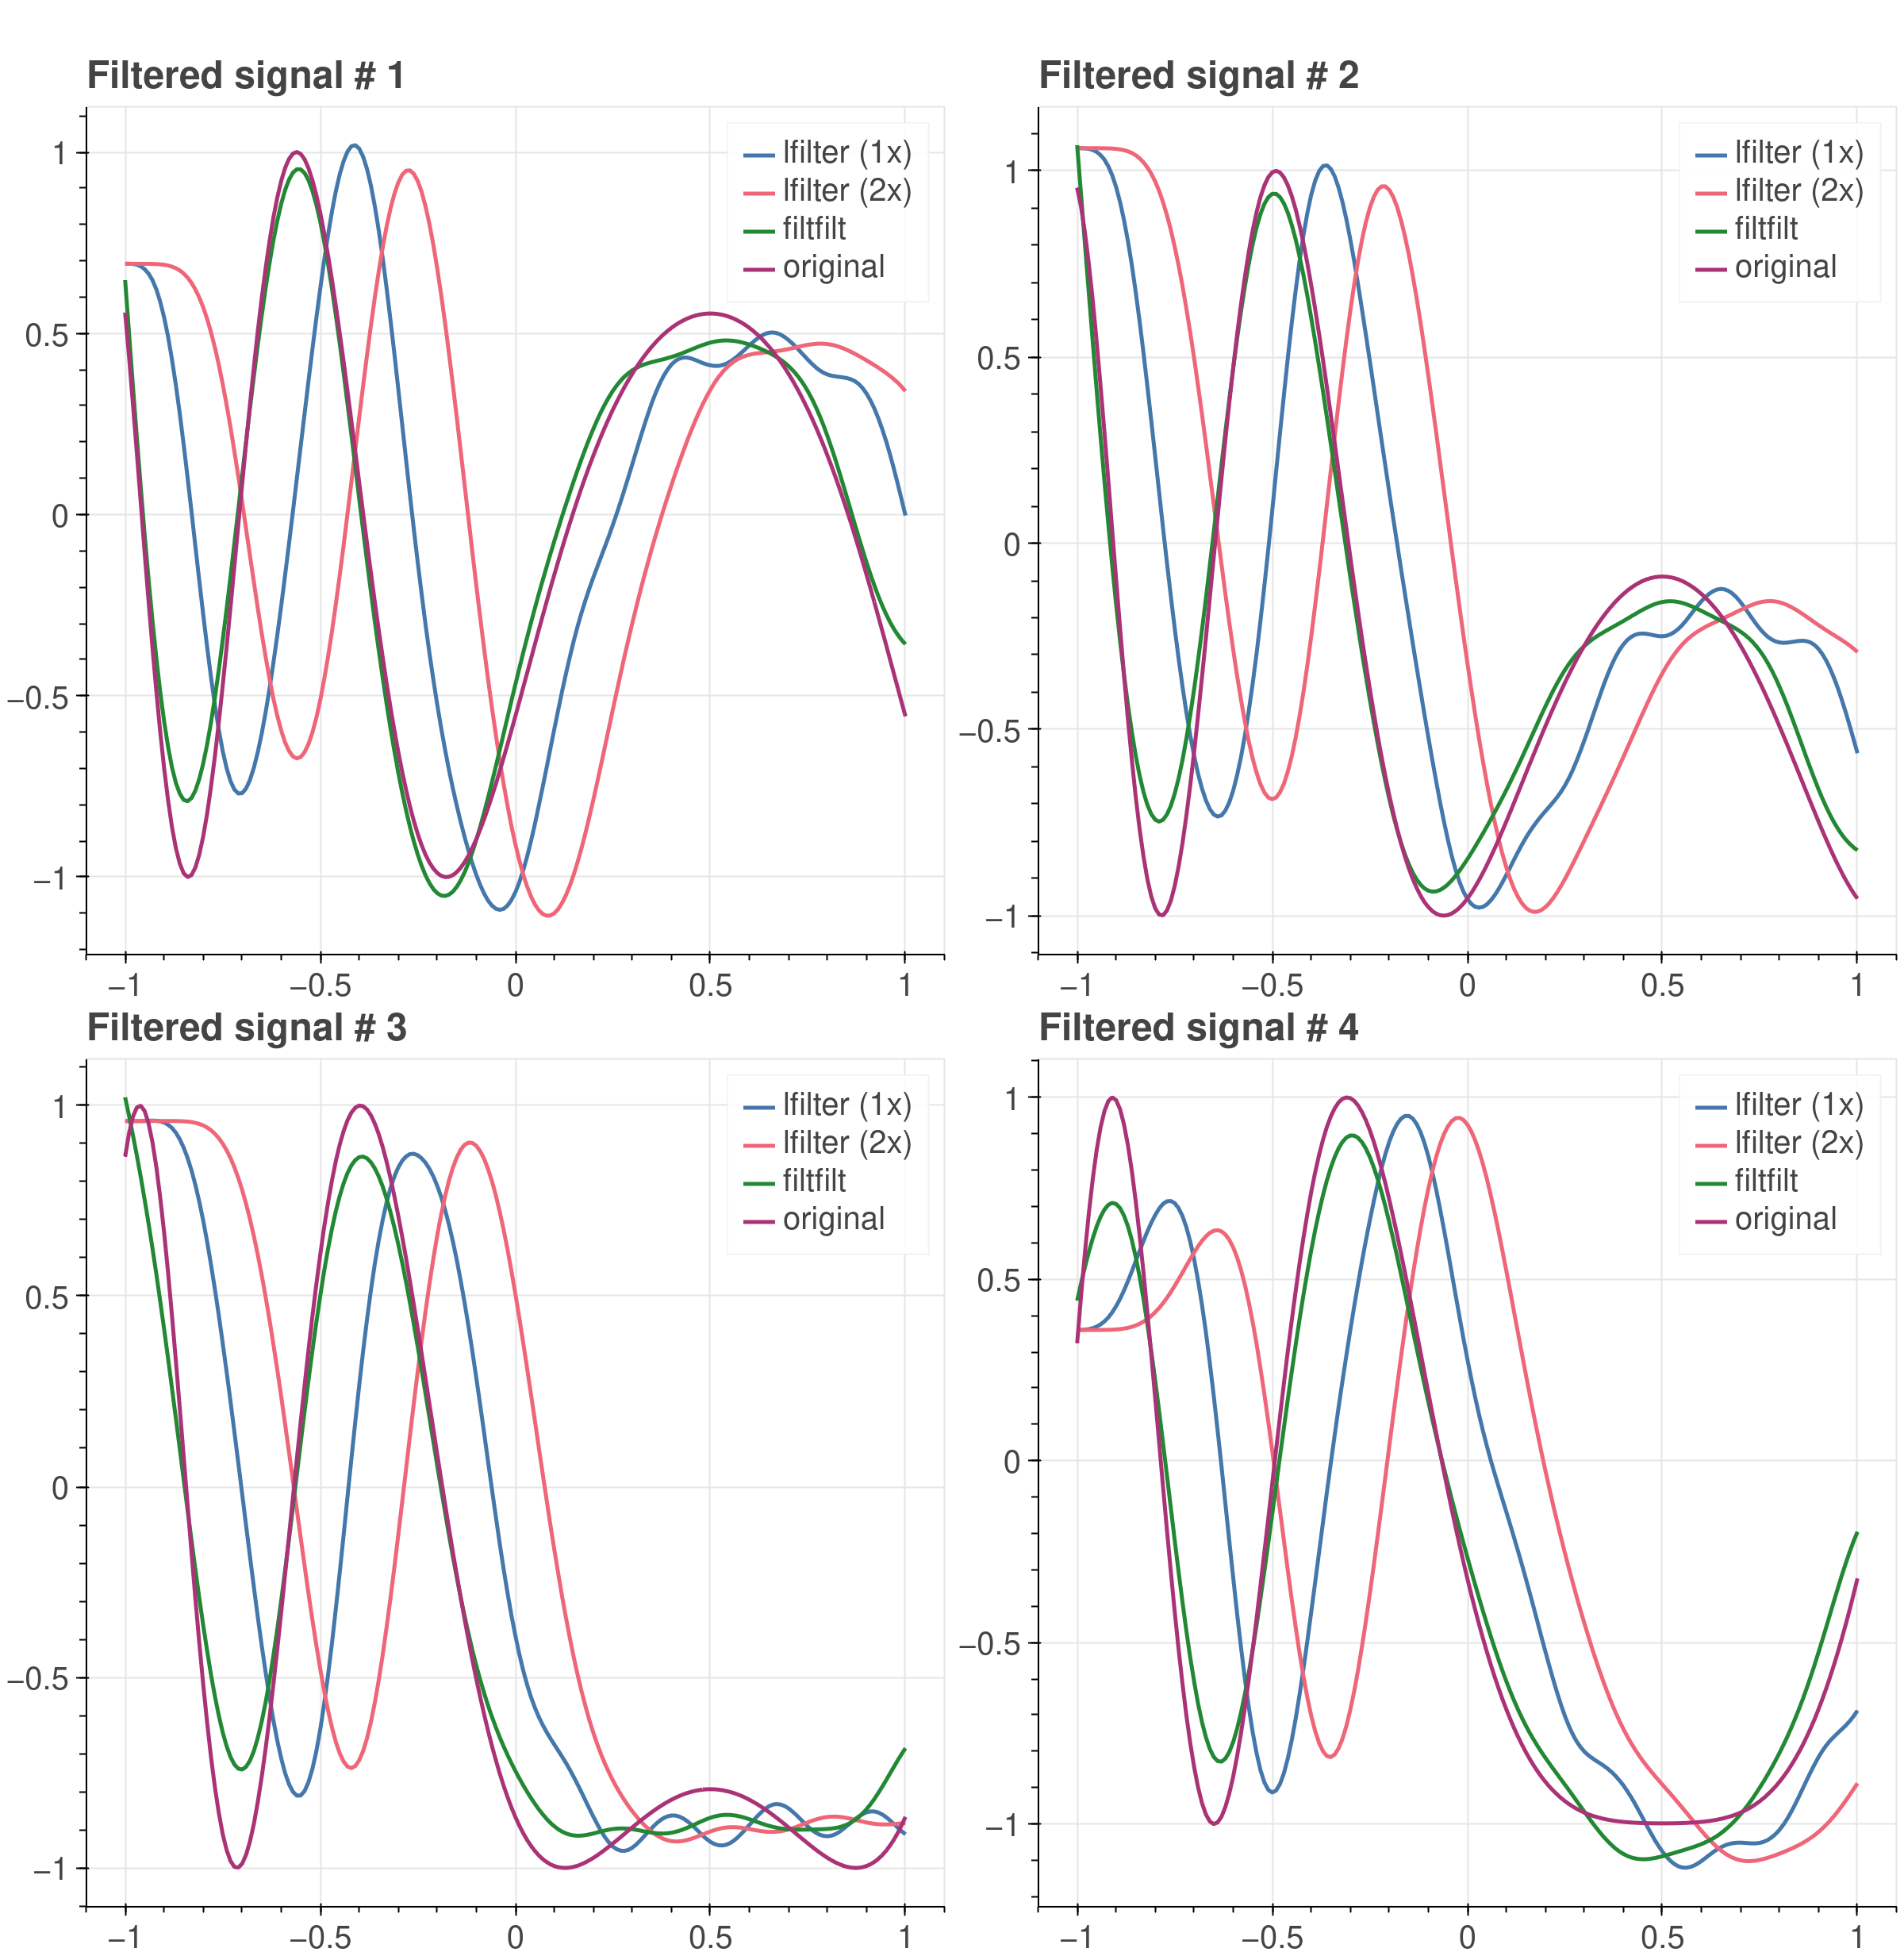 A grid of four plots, arranged in a 2x2 configuration. Each plot shows
the result of taking a noisy signal, applying the lfilter and filtfilt CuPy
in the following order: lfilter once, lfilter twice and filfilt. The filtfilt
results reconstruct the original signal with higher fidelity.